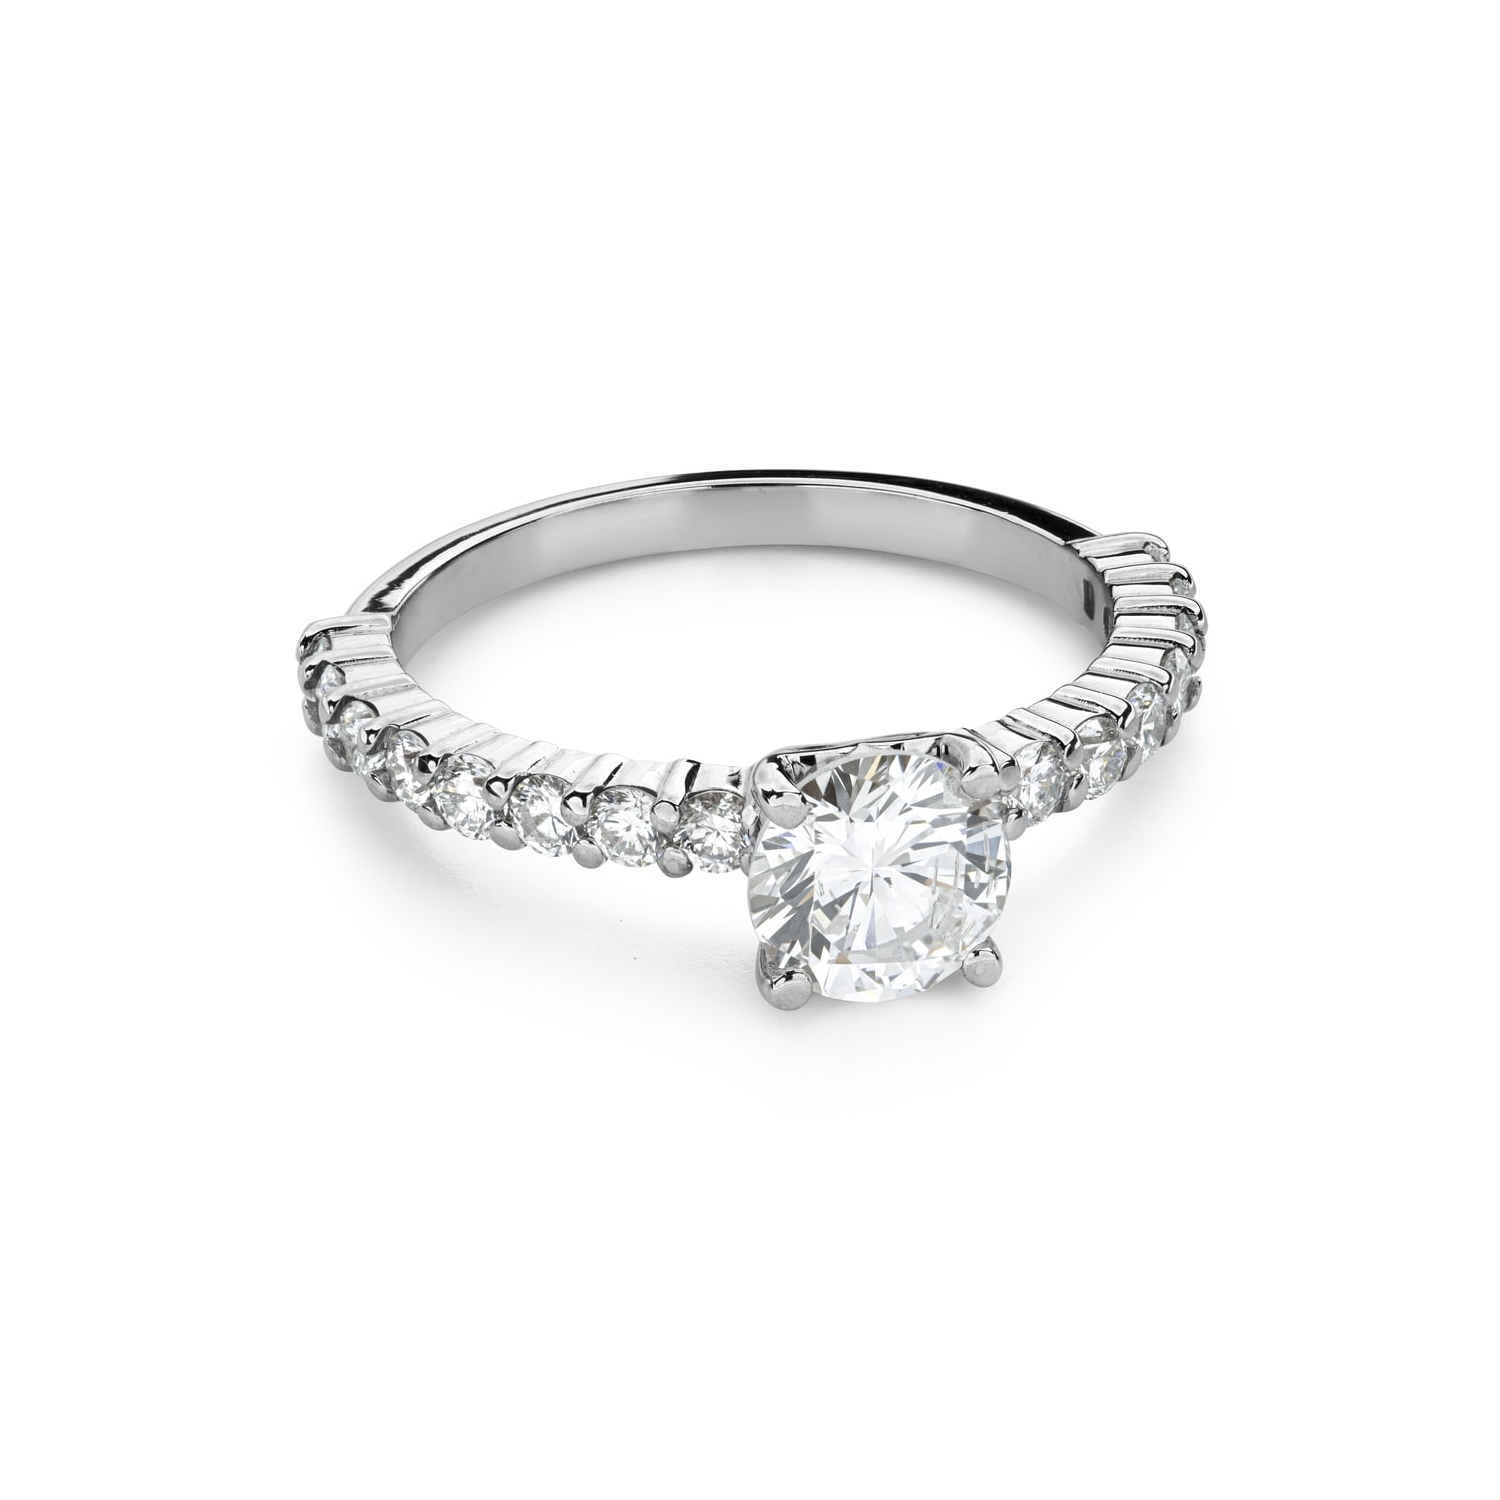 Engagment ring with brilliants "Grace 306"